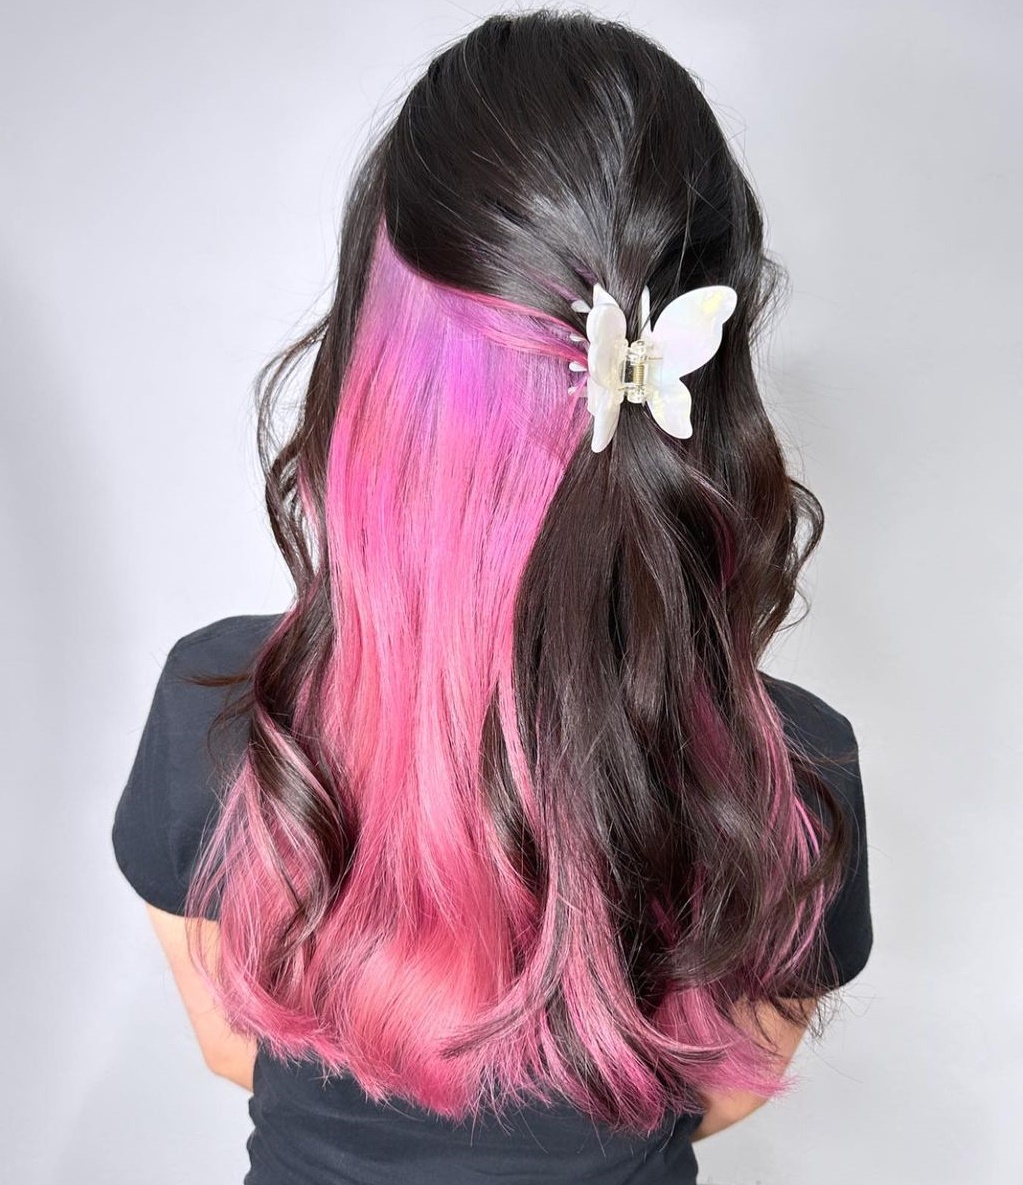 23 Shades of Pink Hair to Swoon Over Your New Look - Hairstylery